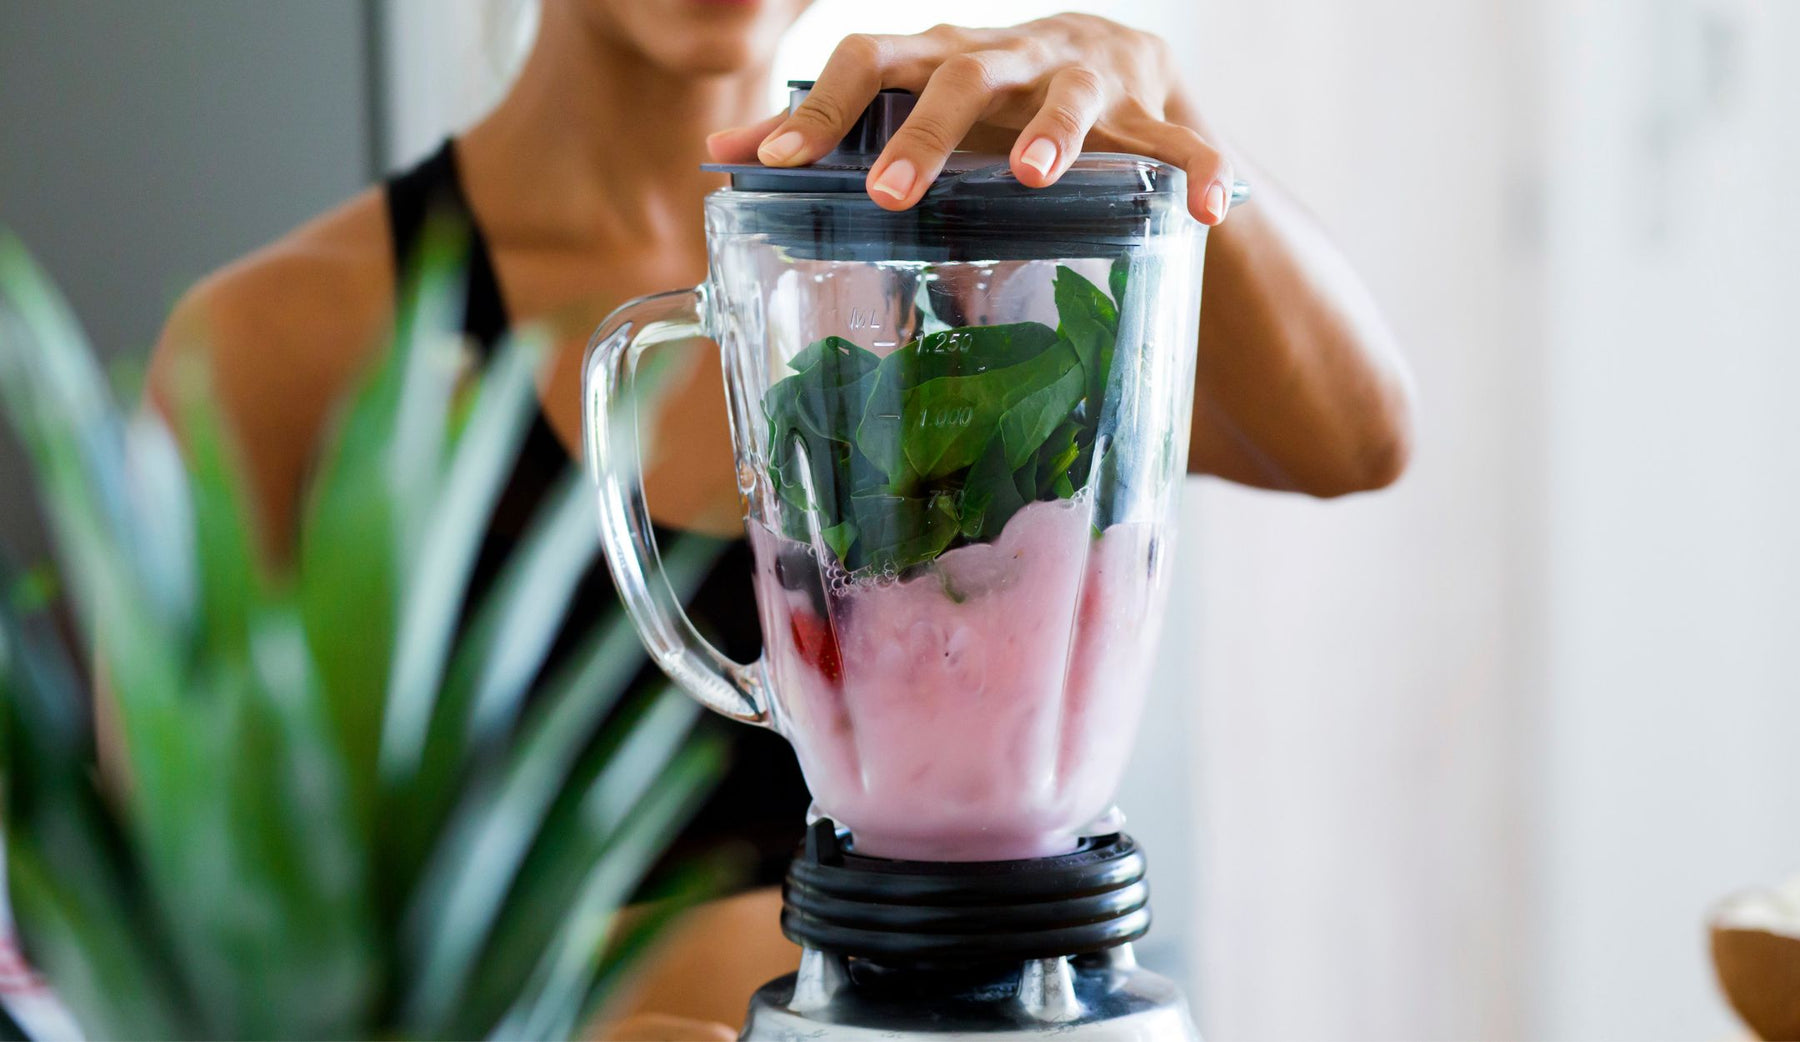 I Tried One of Those Blender Bombs—And They Made My Smoothie So